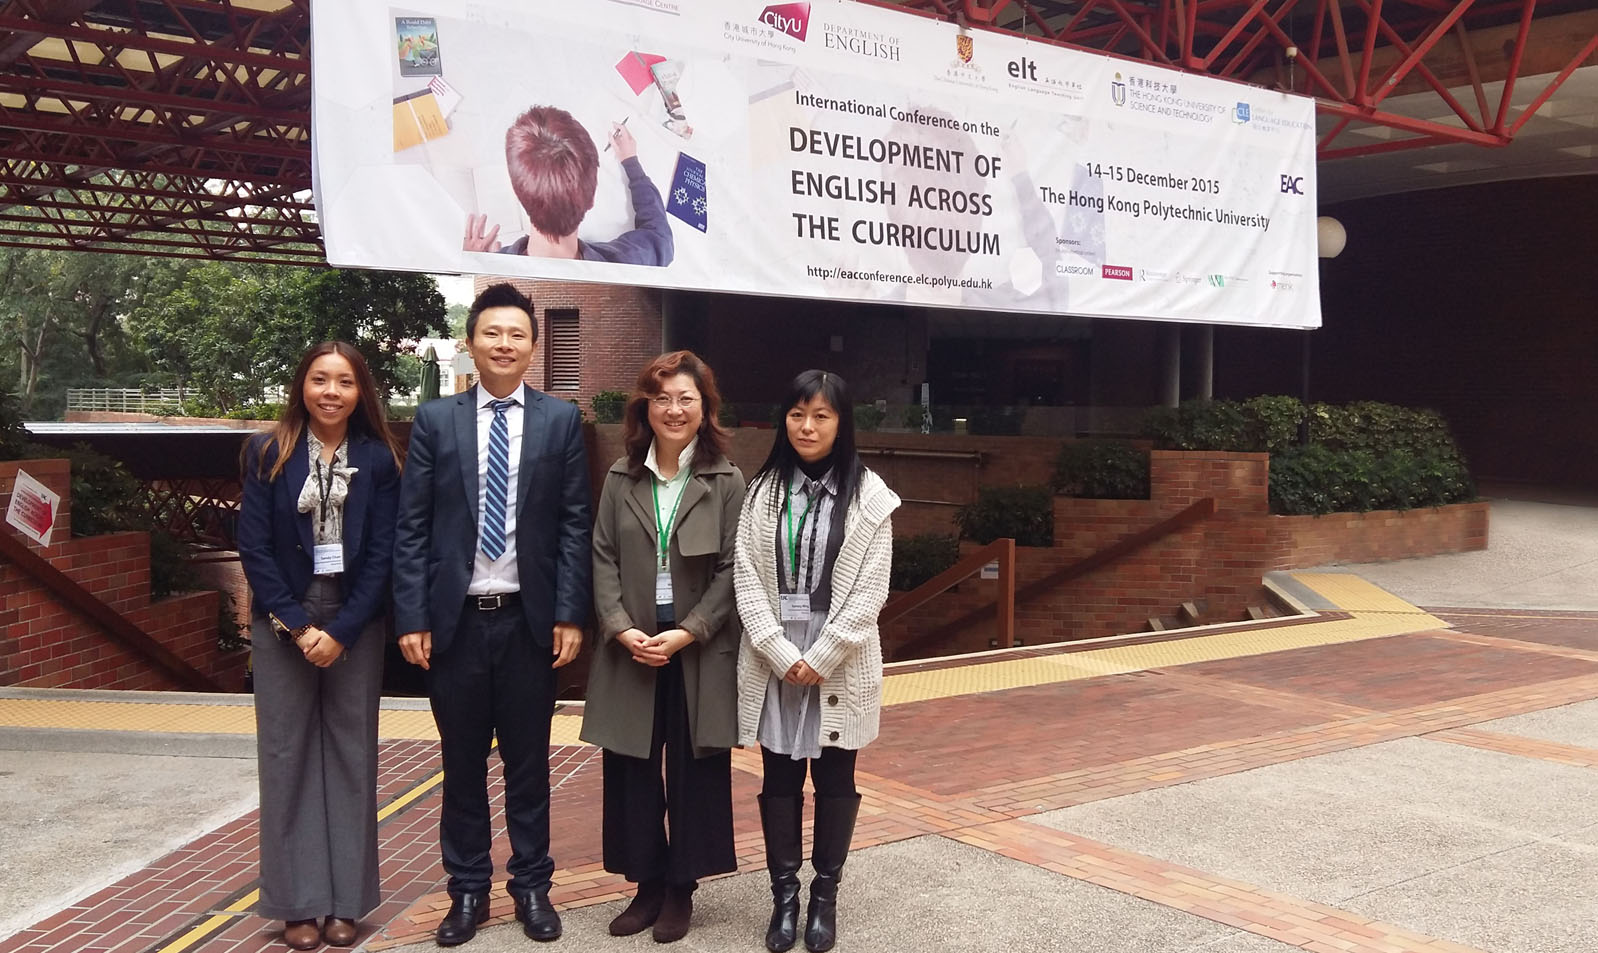 The CIE Team gave a presentation at the International Conference on the Development of English Across the Curriculum.